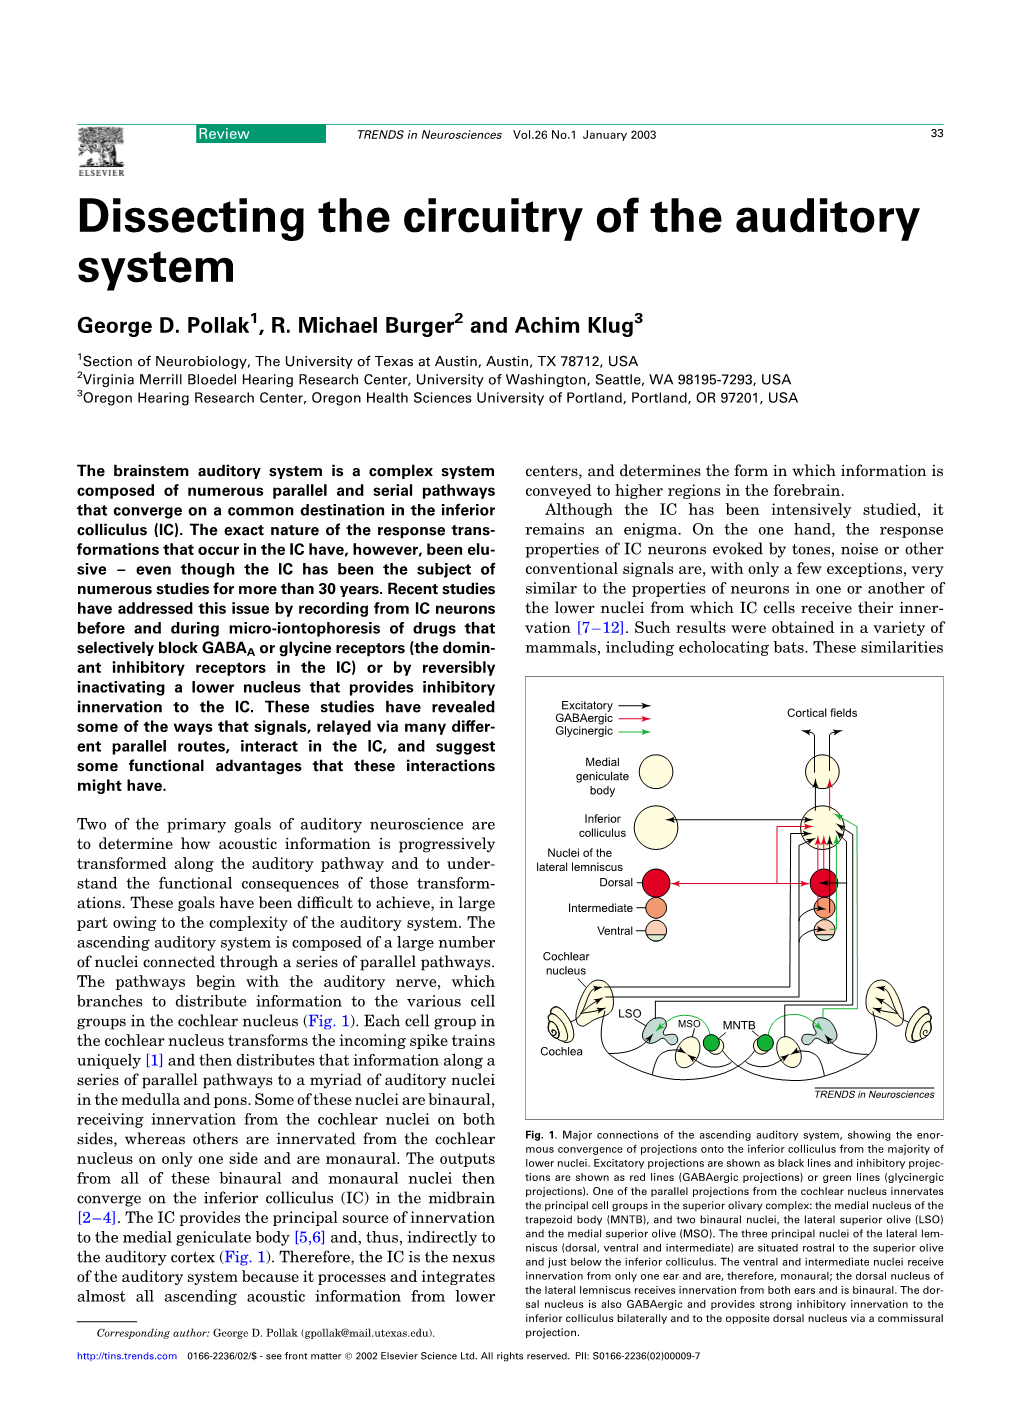 Dissecting the Circuitry of the Auditory System